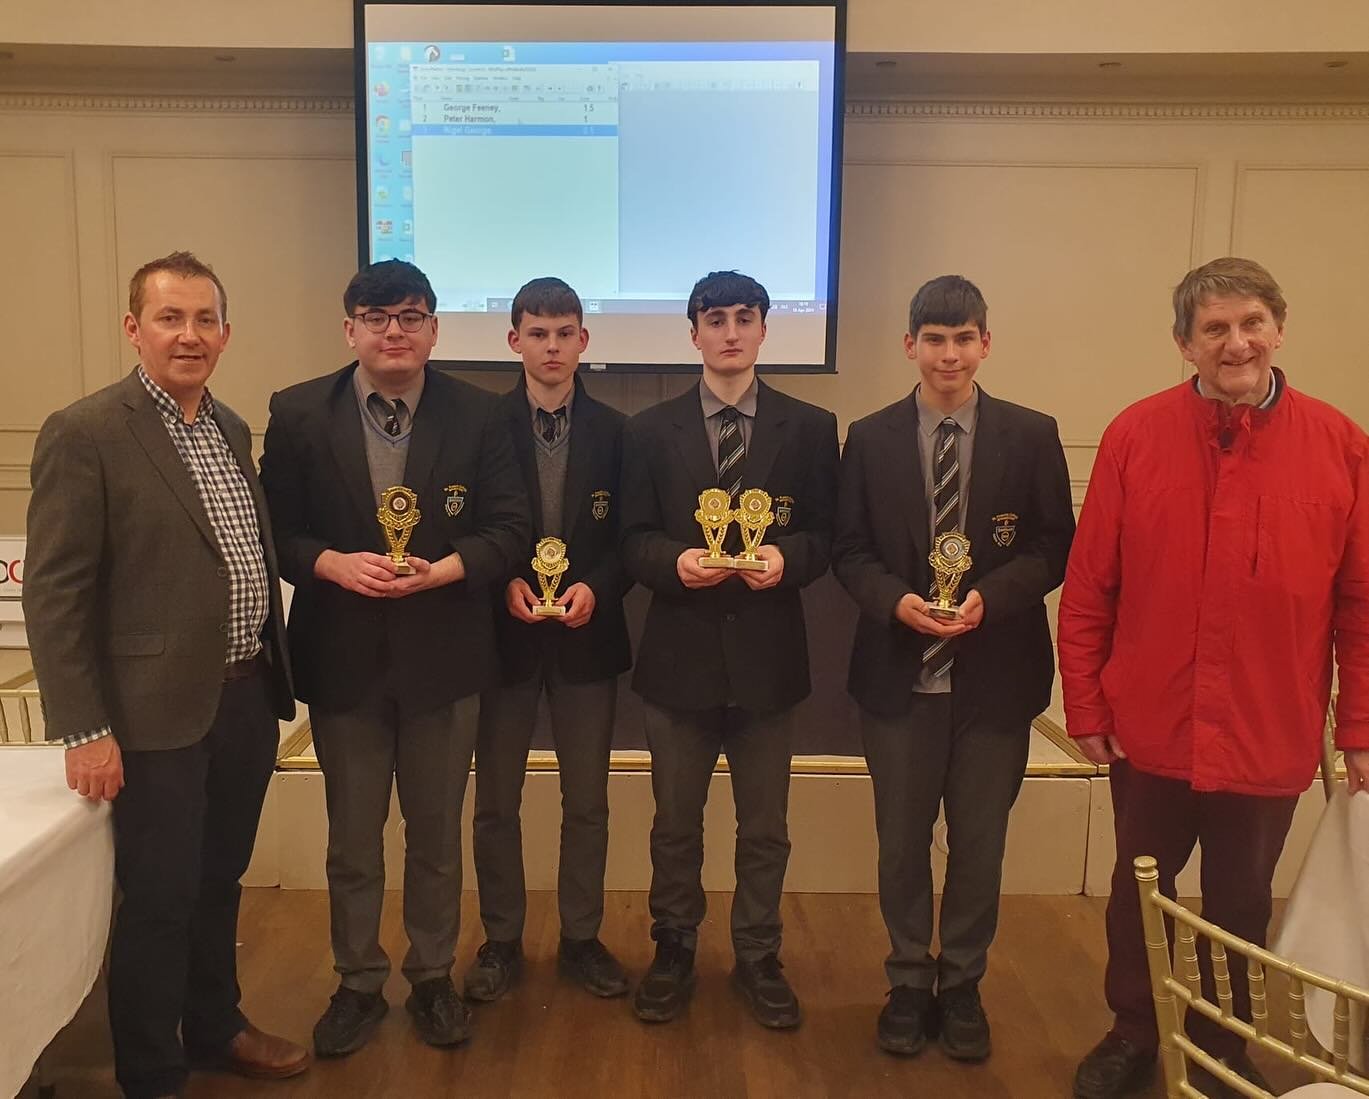 A massive congratulations to our A Team who have won the CheckMate Irish Chess Finals today in Nenagh! 🏆 Well done Kyle Murphy, Hubert Machowski, George Feeney &amp; Declan Clancy! 👏 Another huge congratulations also to George Feeney who won overal